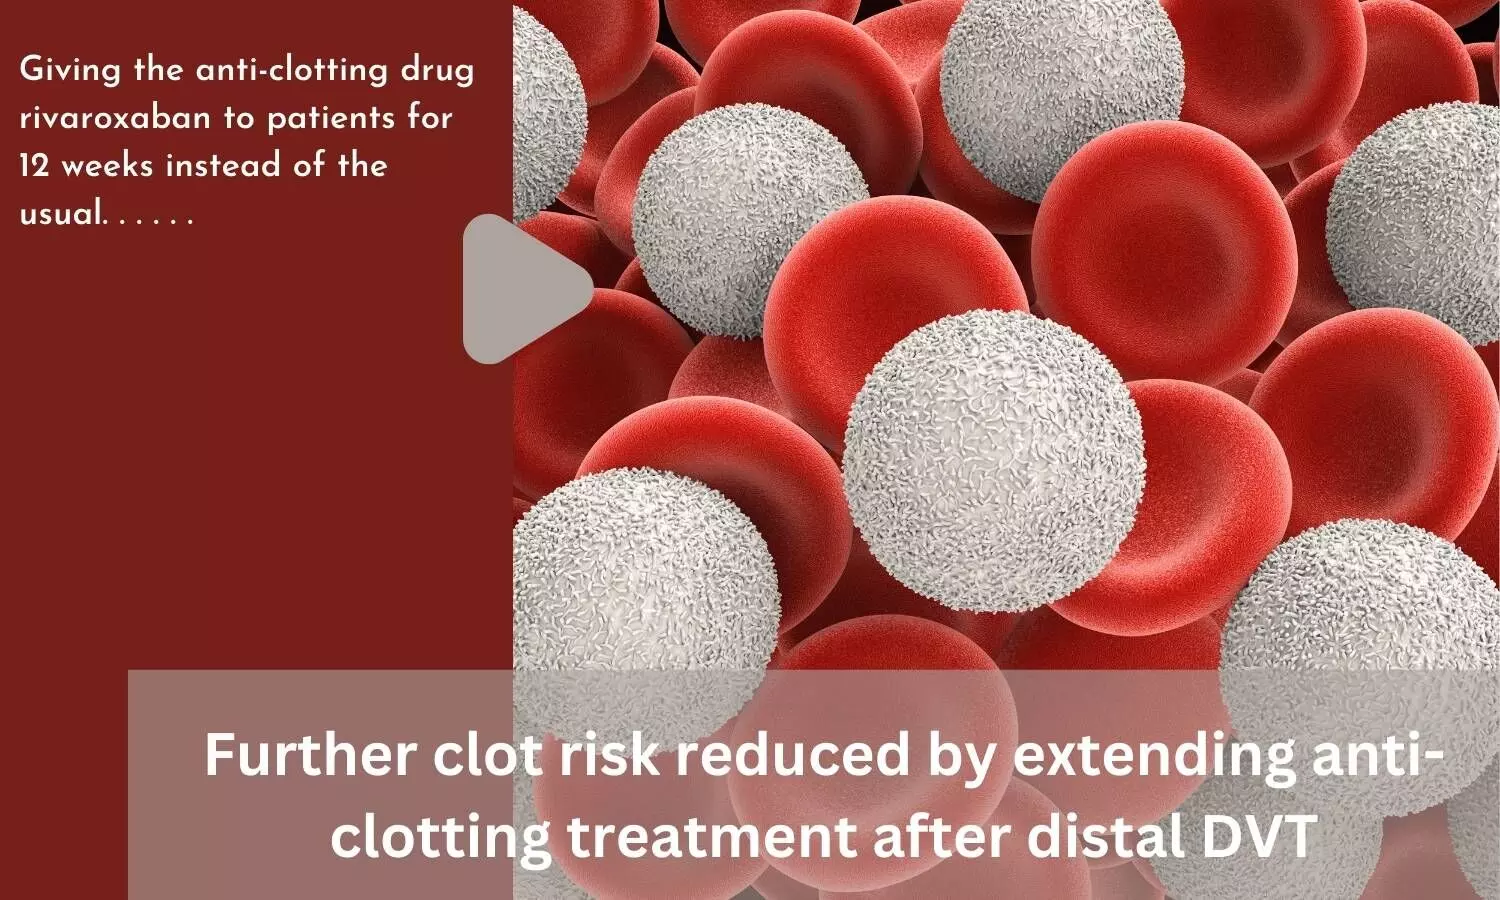 Further clot risk reduced by extending anti-clotting treatment after distal DVT